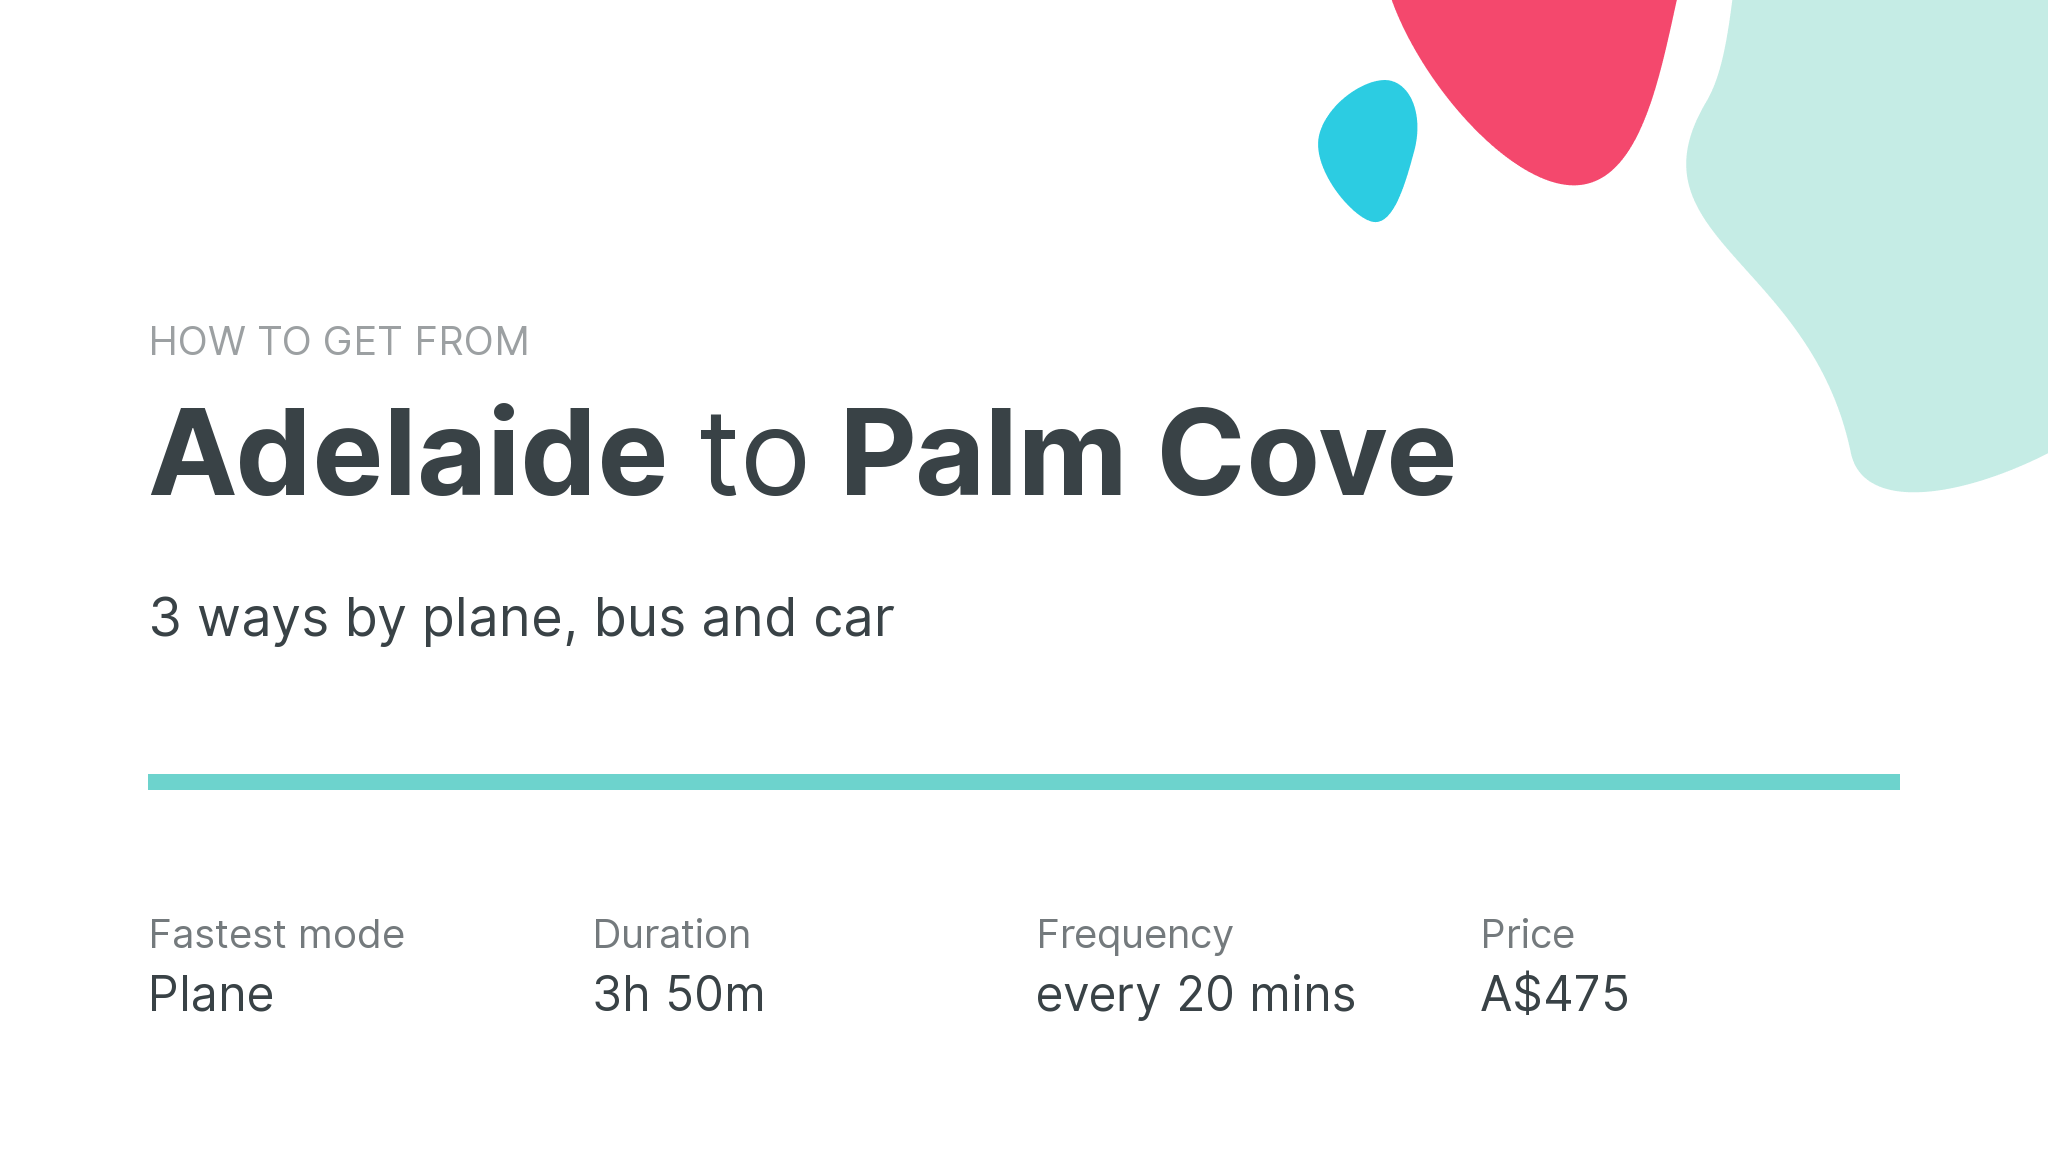 How do I get from Adelaide to Palm Cove